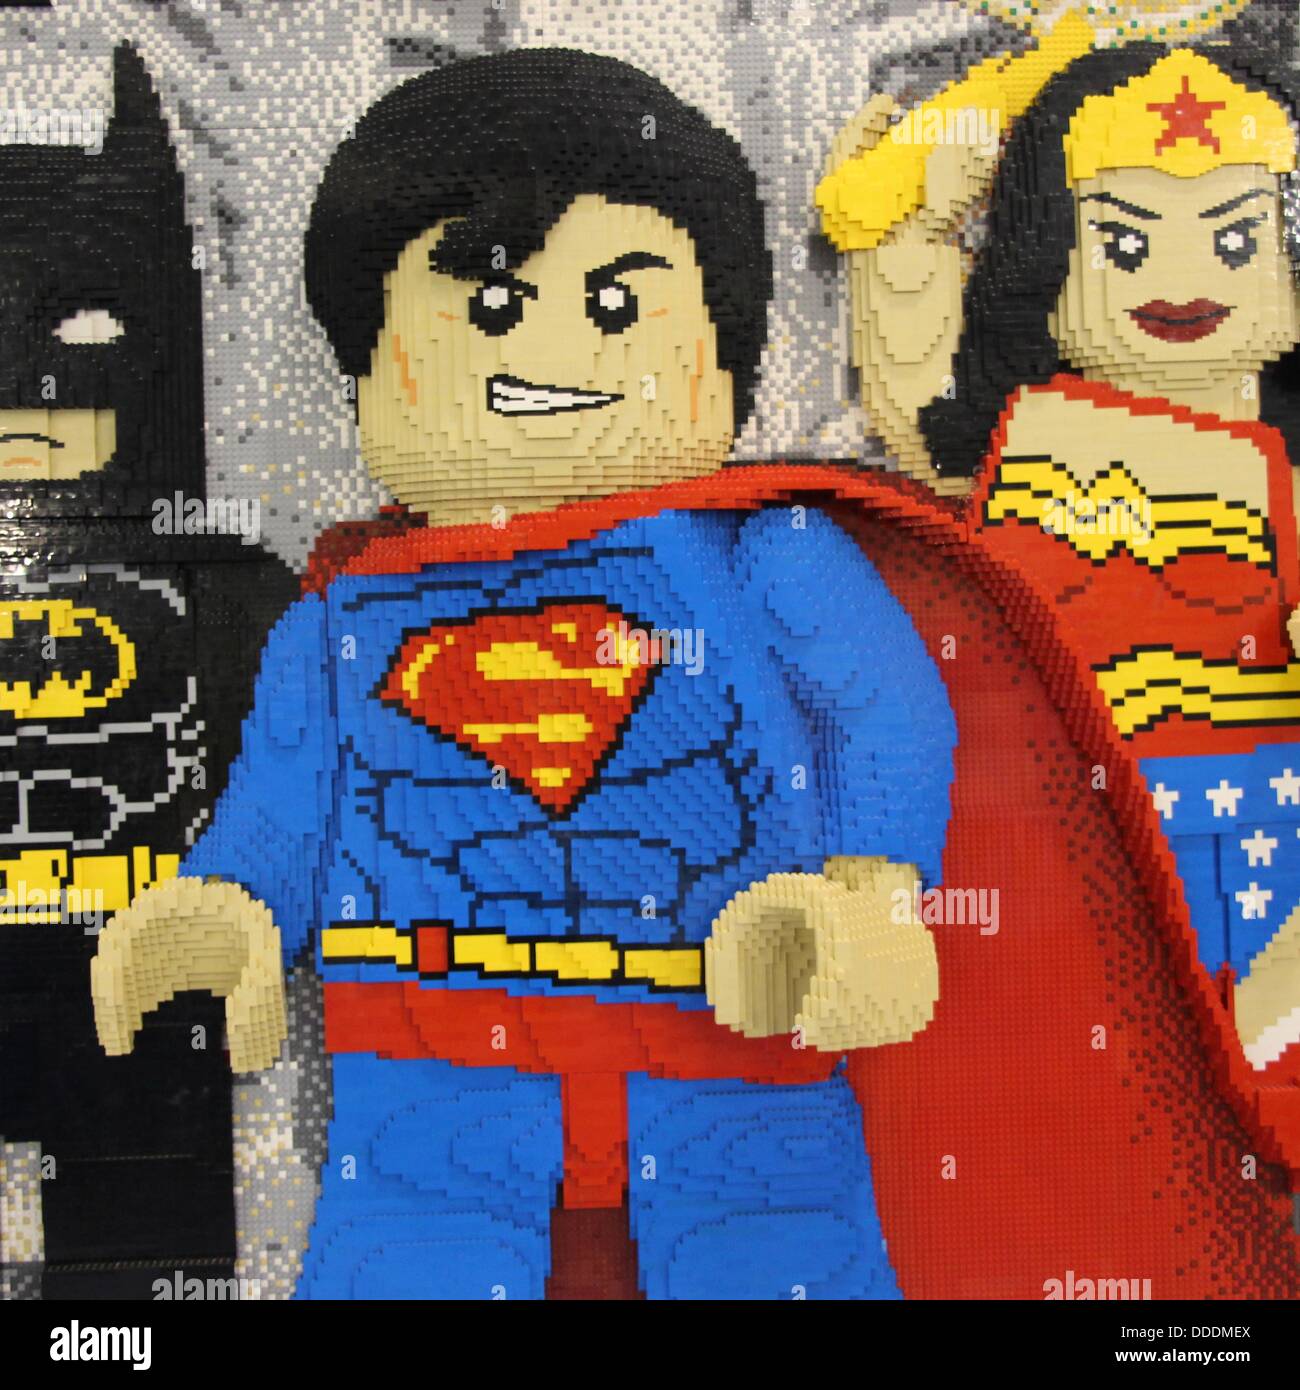 Batman, Superman and Wonder Woman from DC Comics made out of LEGOs. Stock Photo